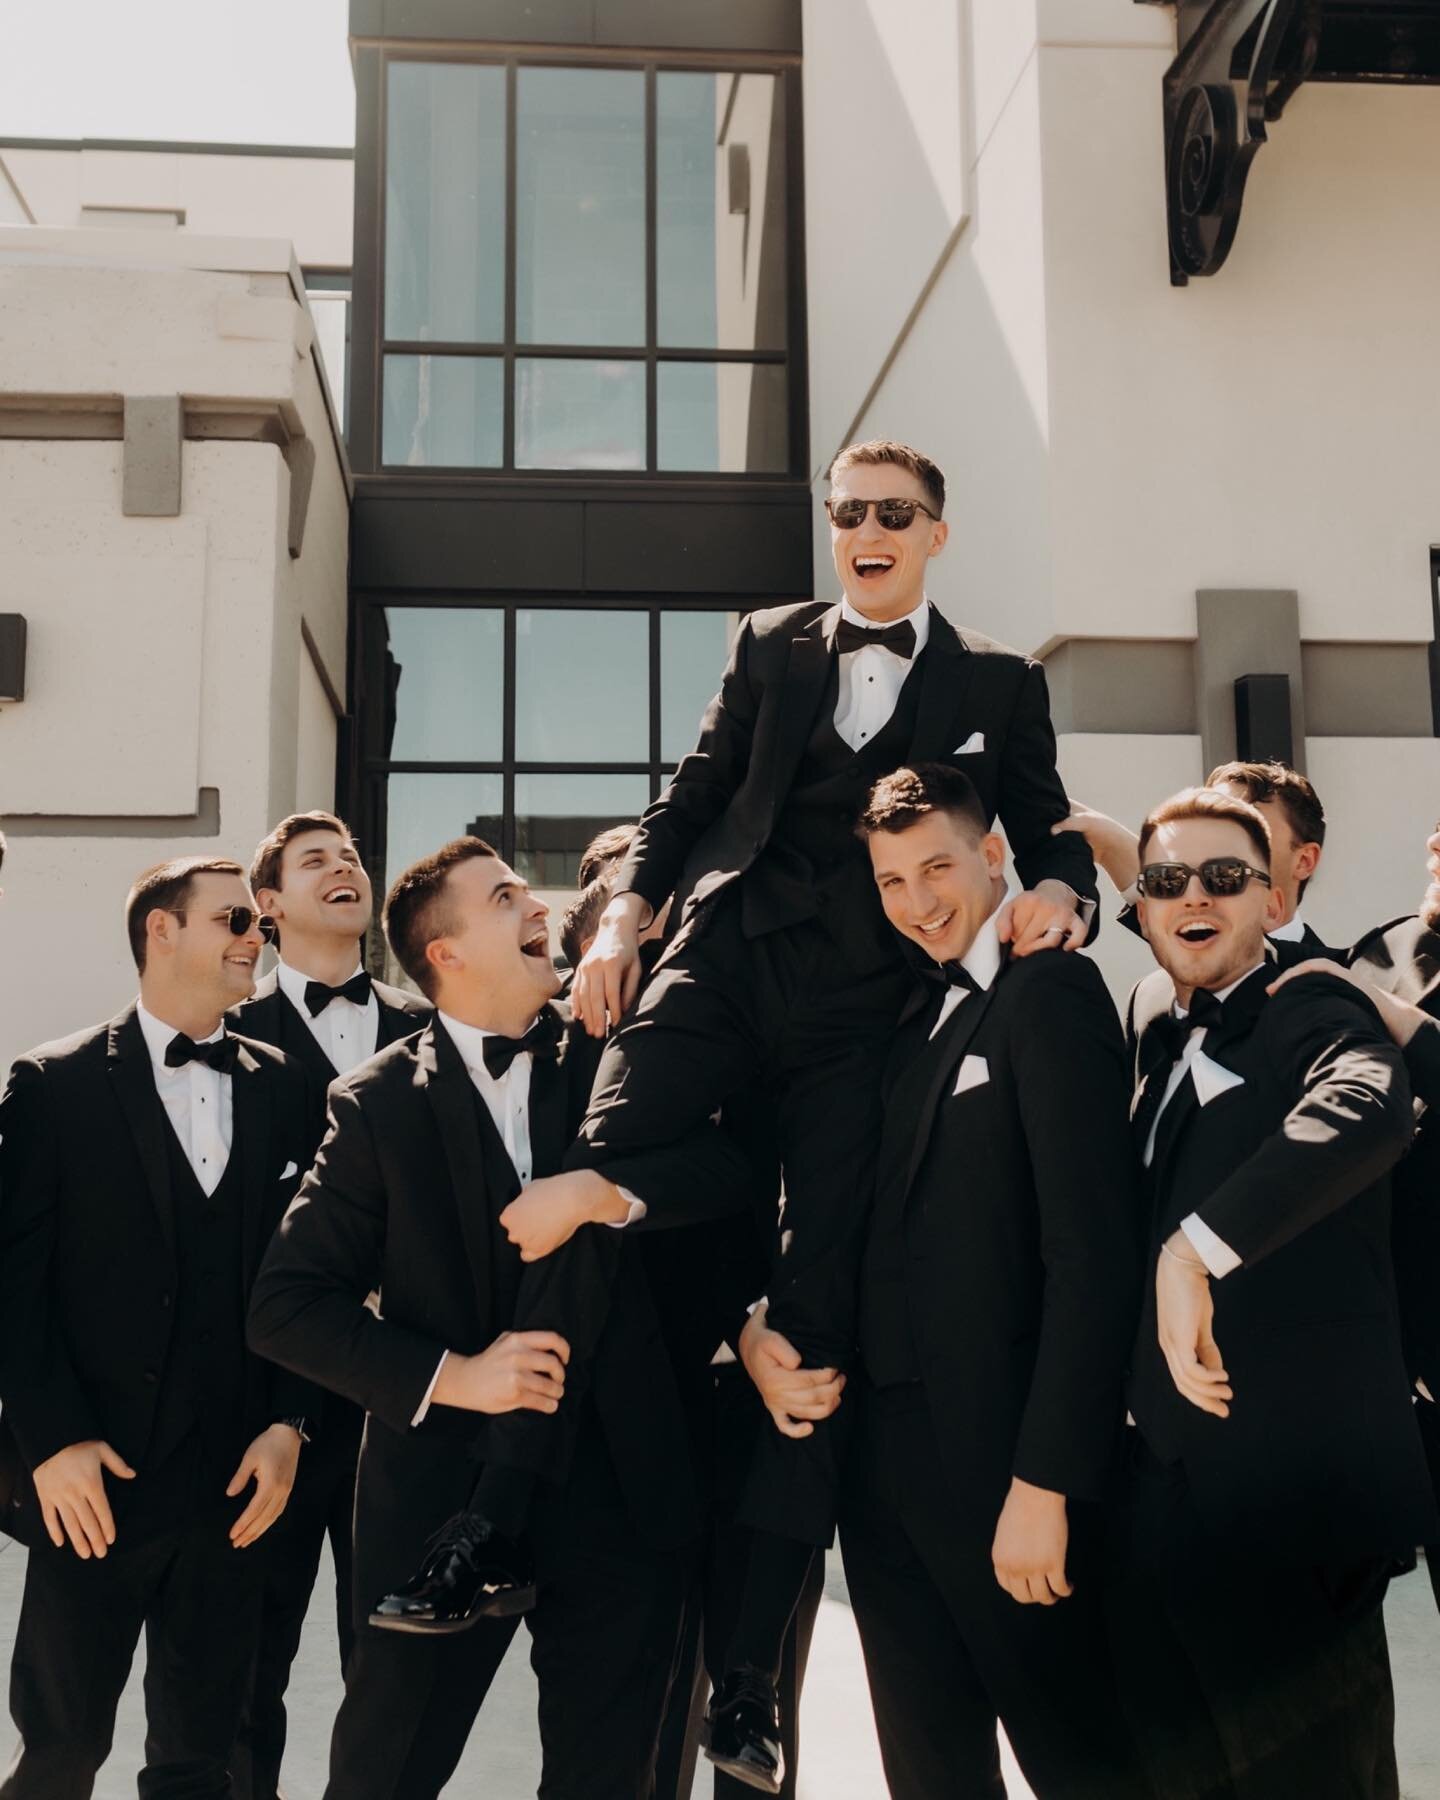 Future Wedding Parties- take notes from Hannah + Cody&rsquo;s favorite people. I can&rsquo;t say enough how amazing they were.

Nothing but energy, happiness, positivity, hype, and support for the newlyweds alllll day 🎉🍻🥂
.
.
.
Video | @aarondatuf